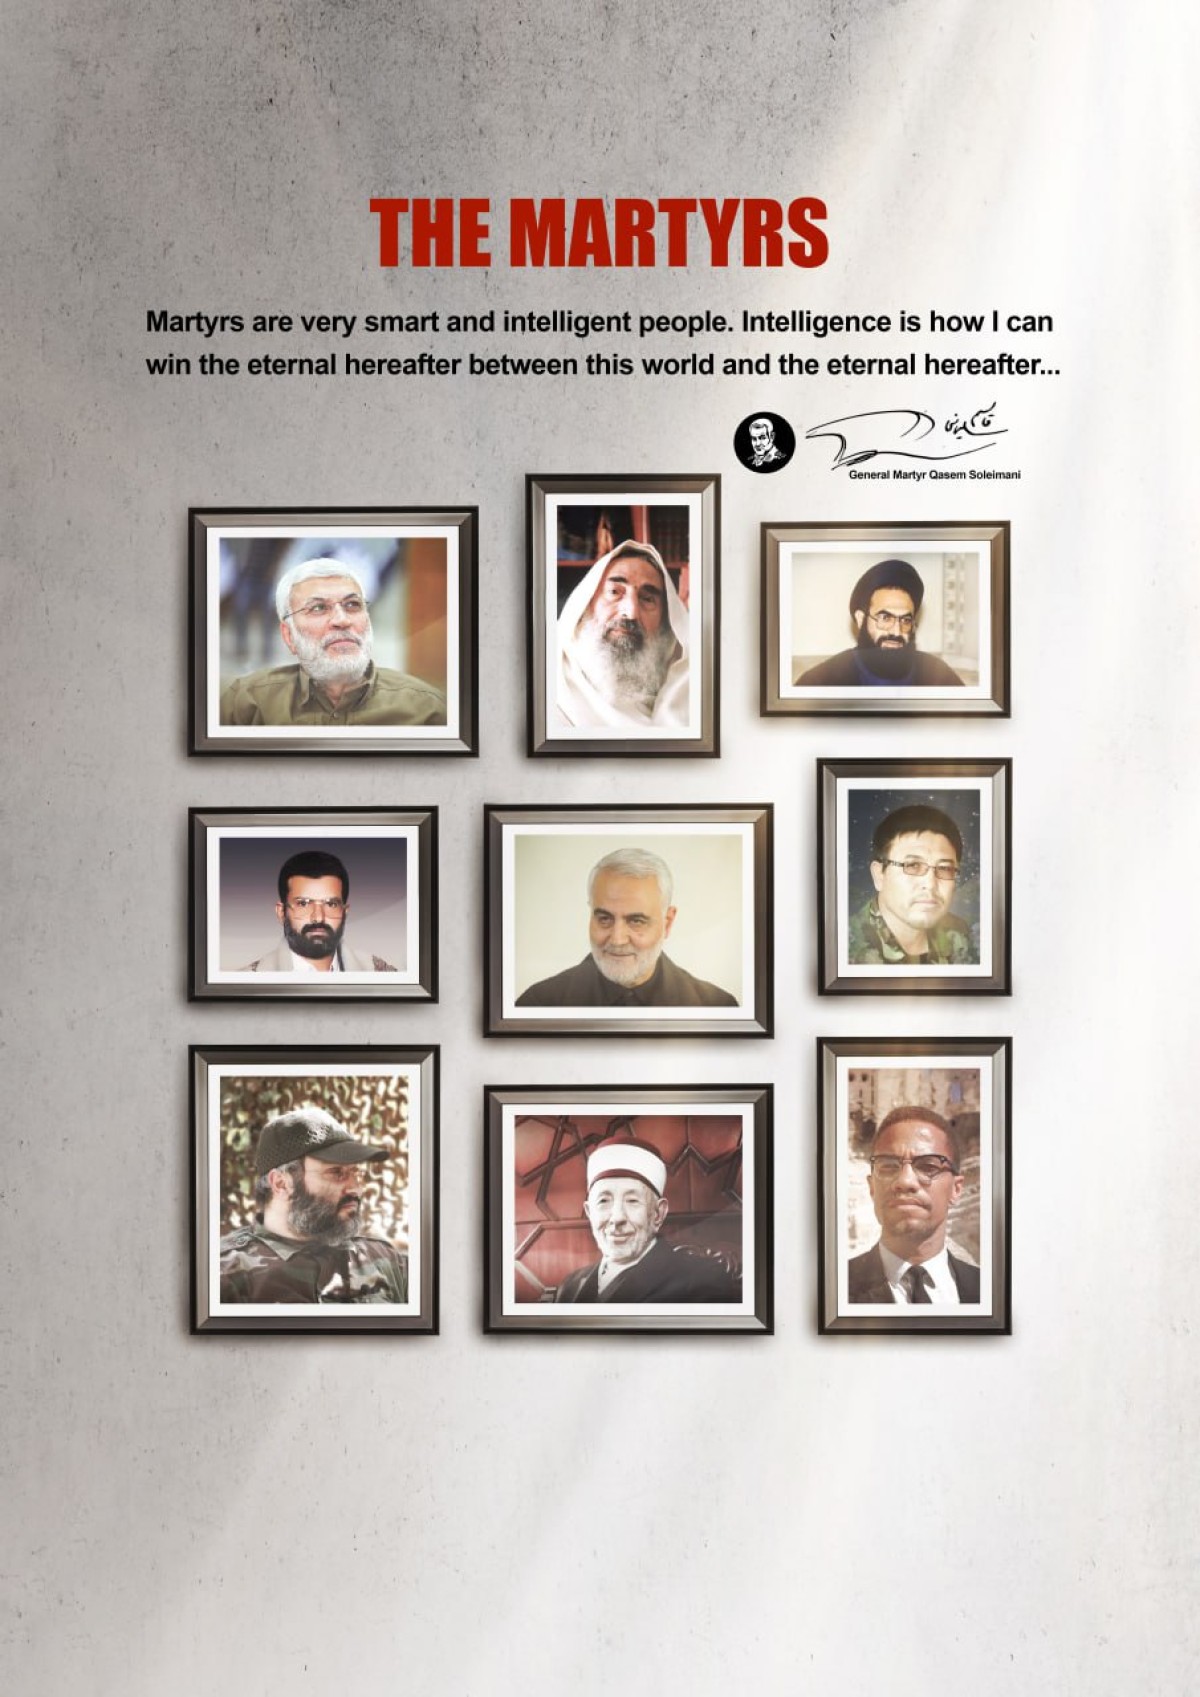 THE MARTYRS